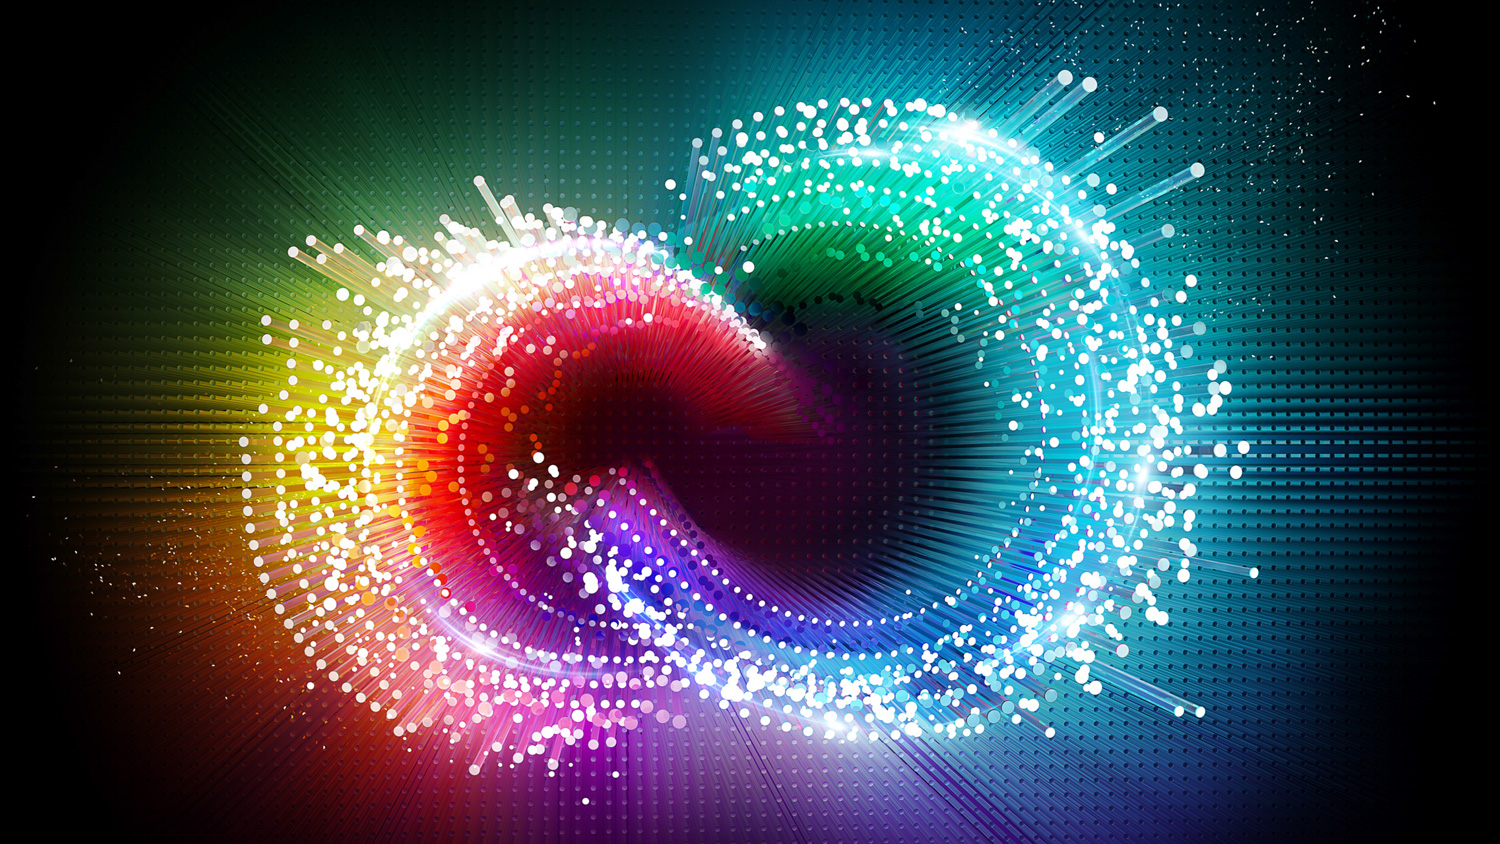 Photoshop Creative Cloud 2014 Logo - Moving Cool Backgrounds For Chromebooks - HD Wallpaper 